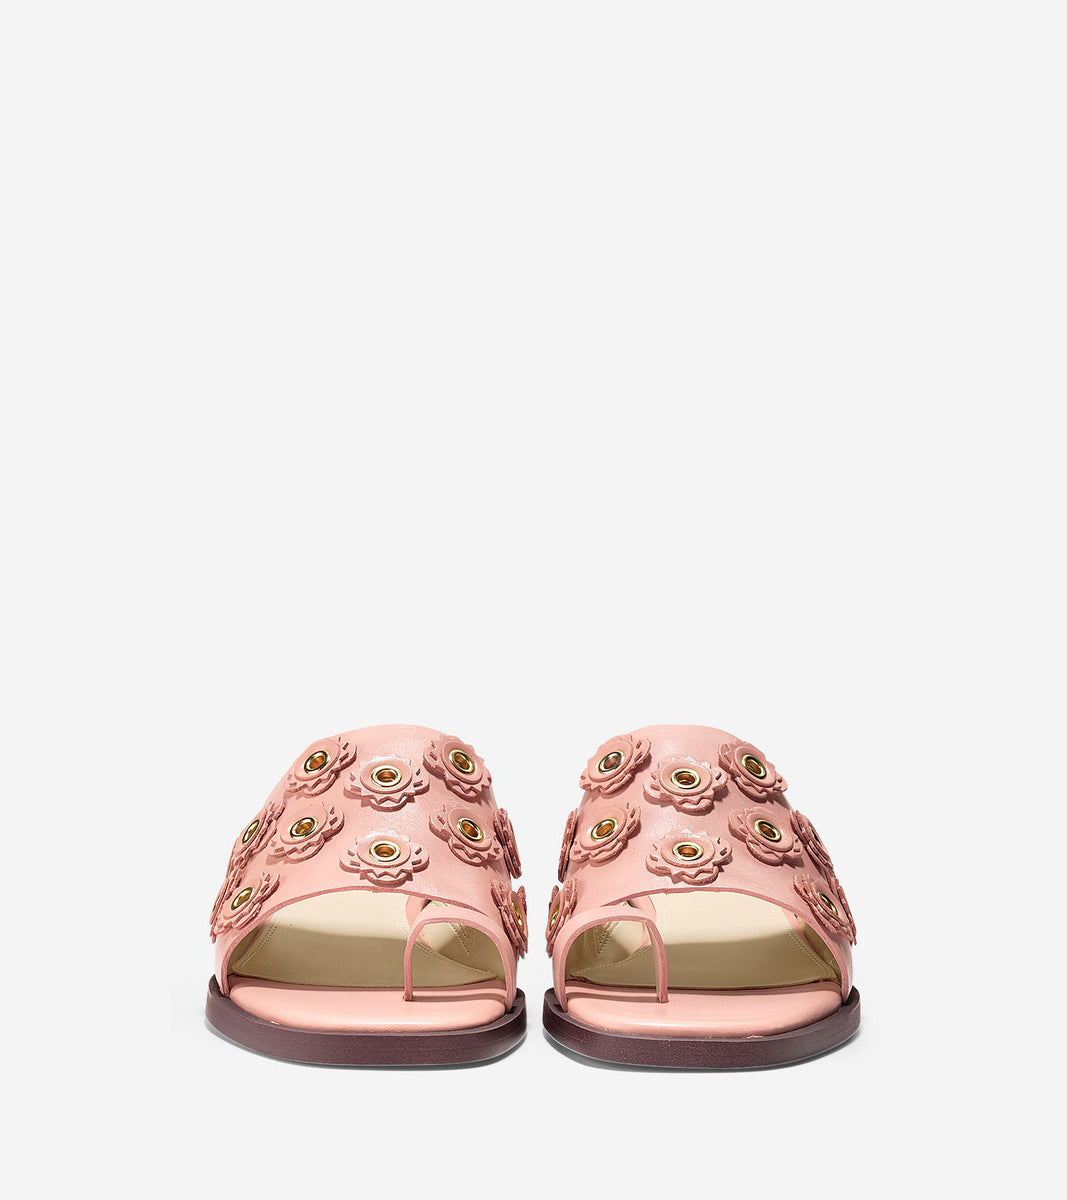 ColeHaan-Carly Floral Sandal (35mm)-w10664-Coral Almond